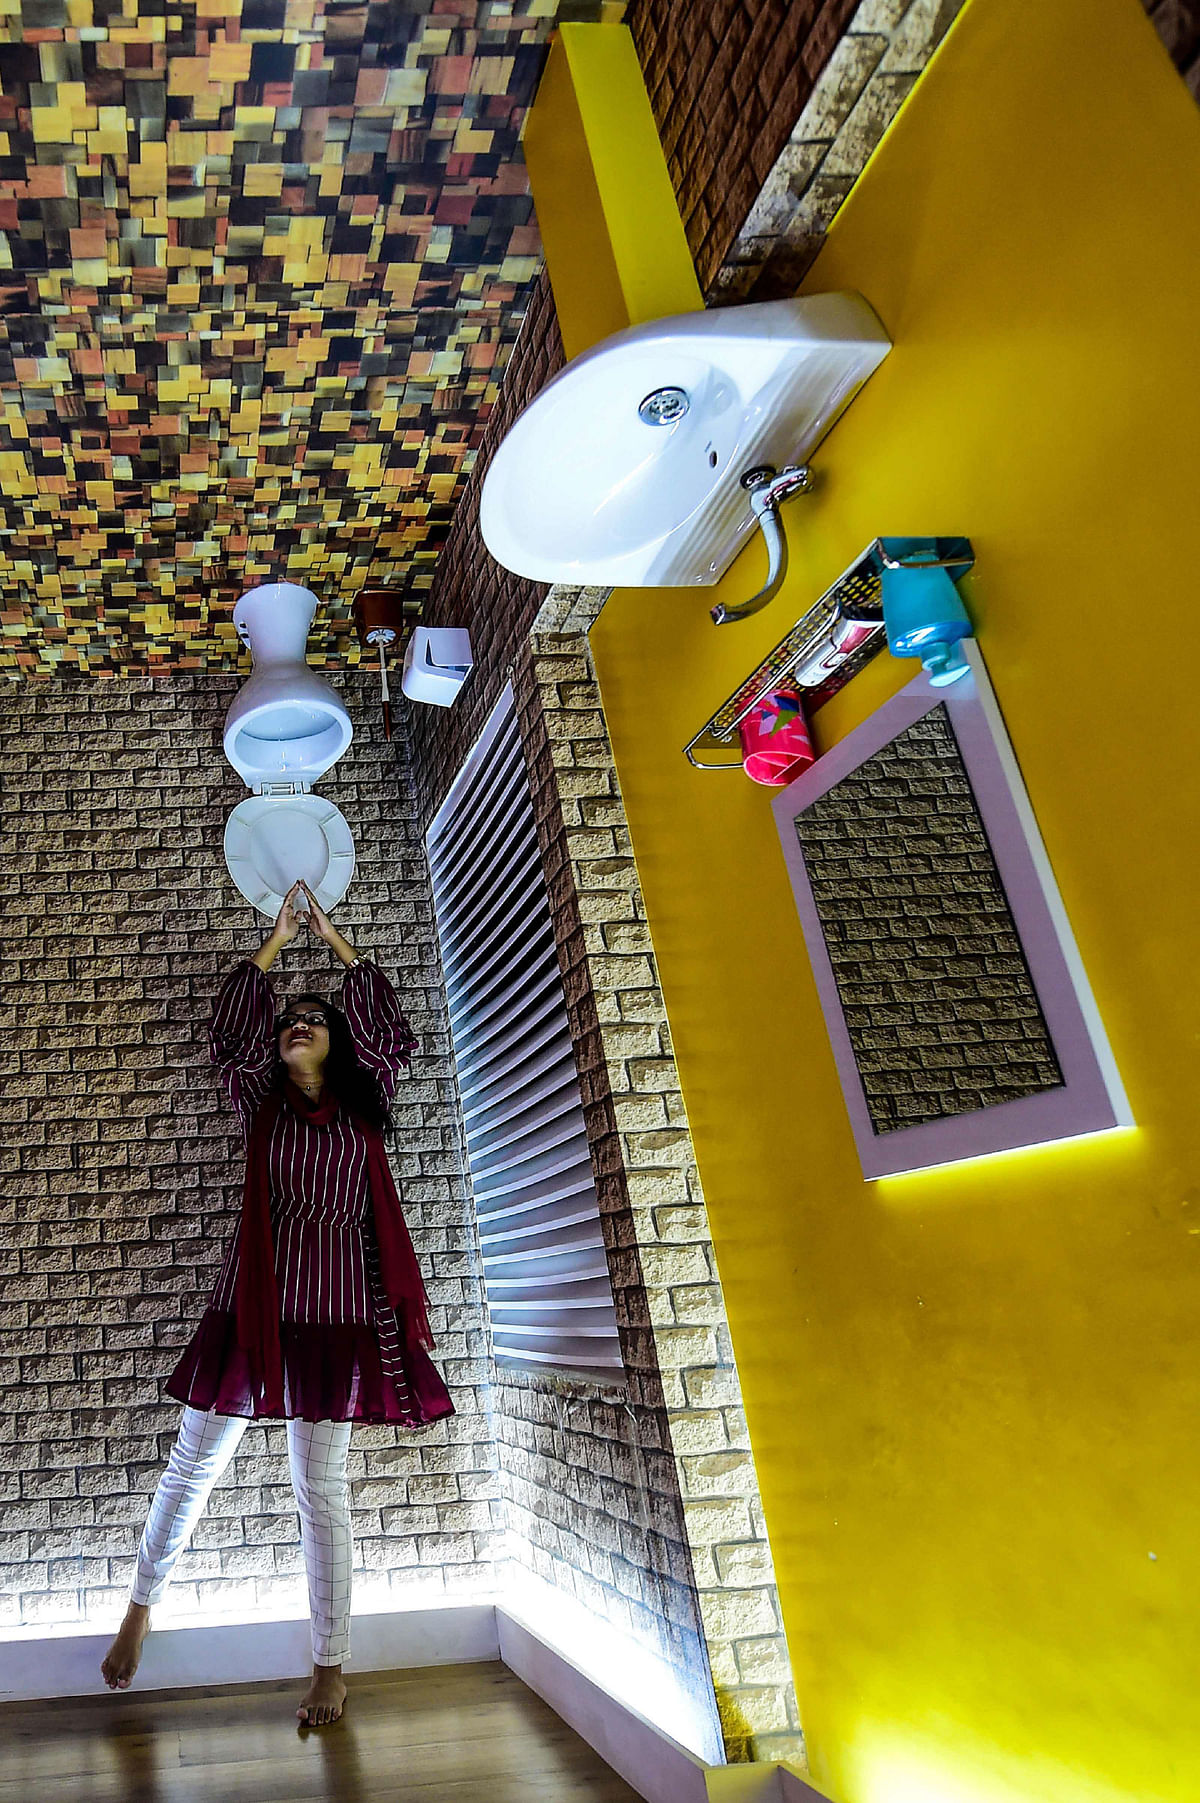 A visitor pose for a picture inside an upside-down cafeteria in Dhaka on 18 June 2019. Photo: AFP